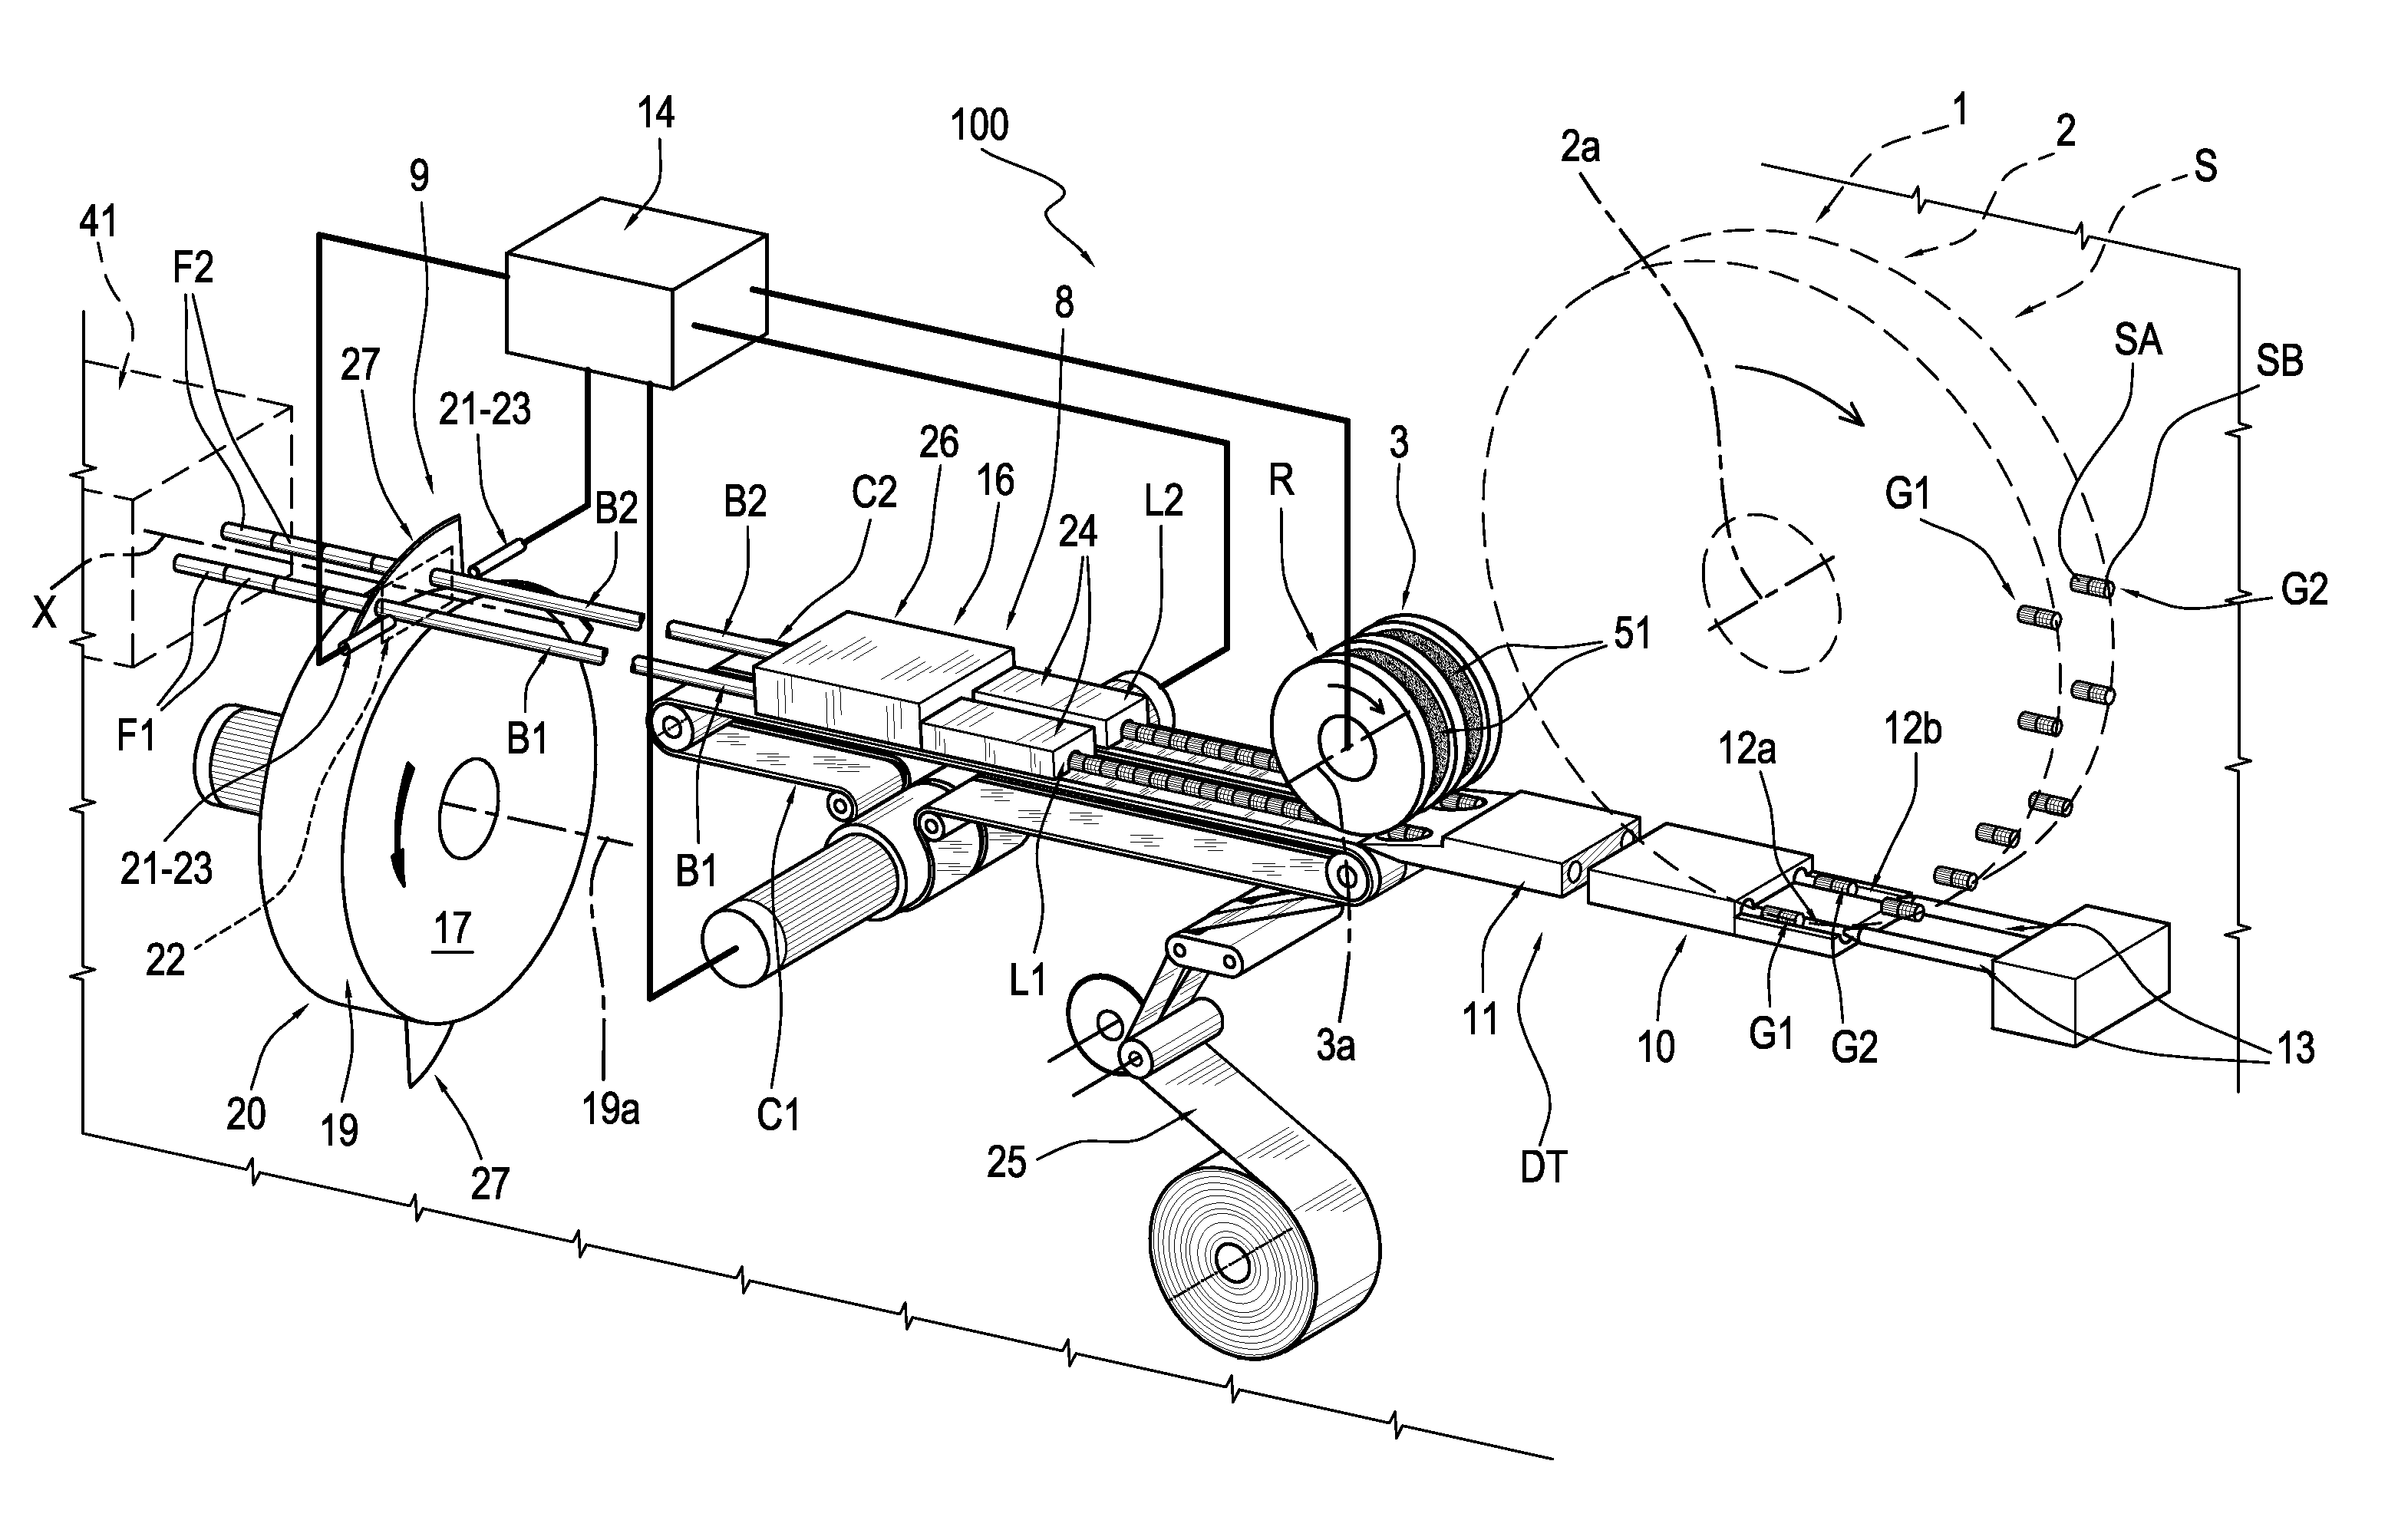 Machine and method for manufacturing composite filters